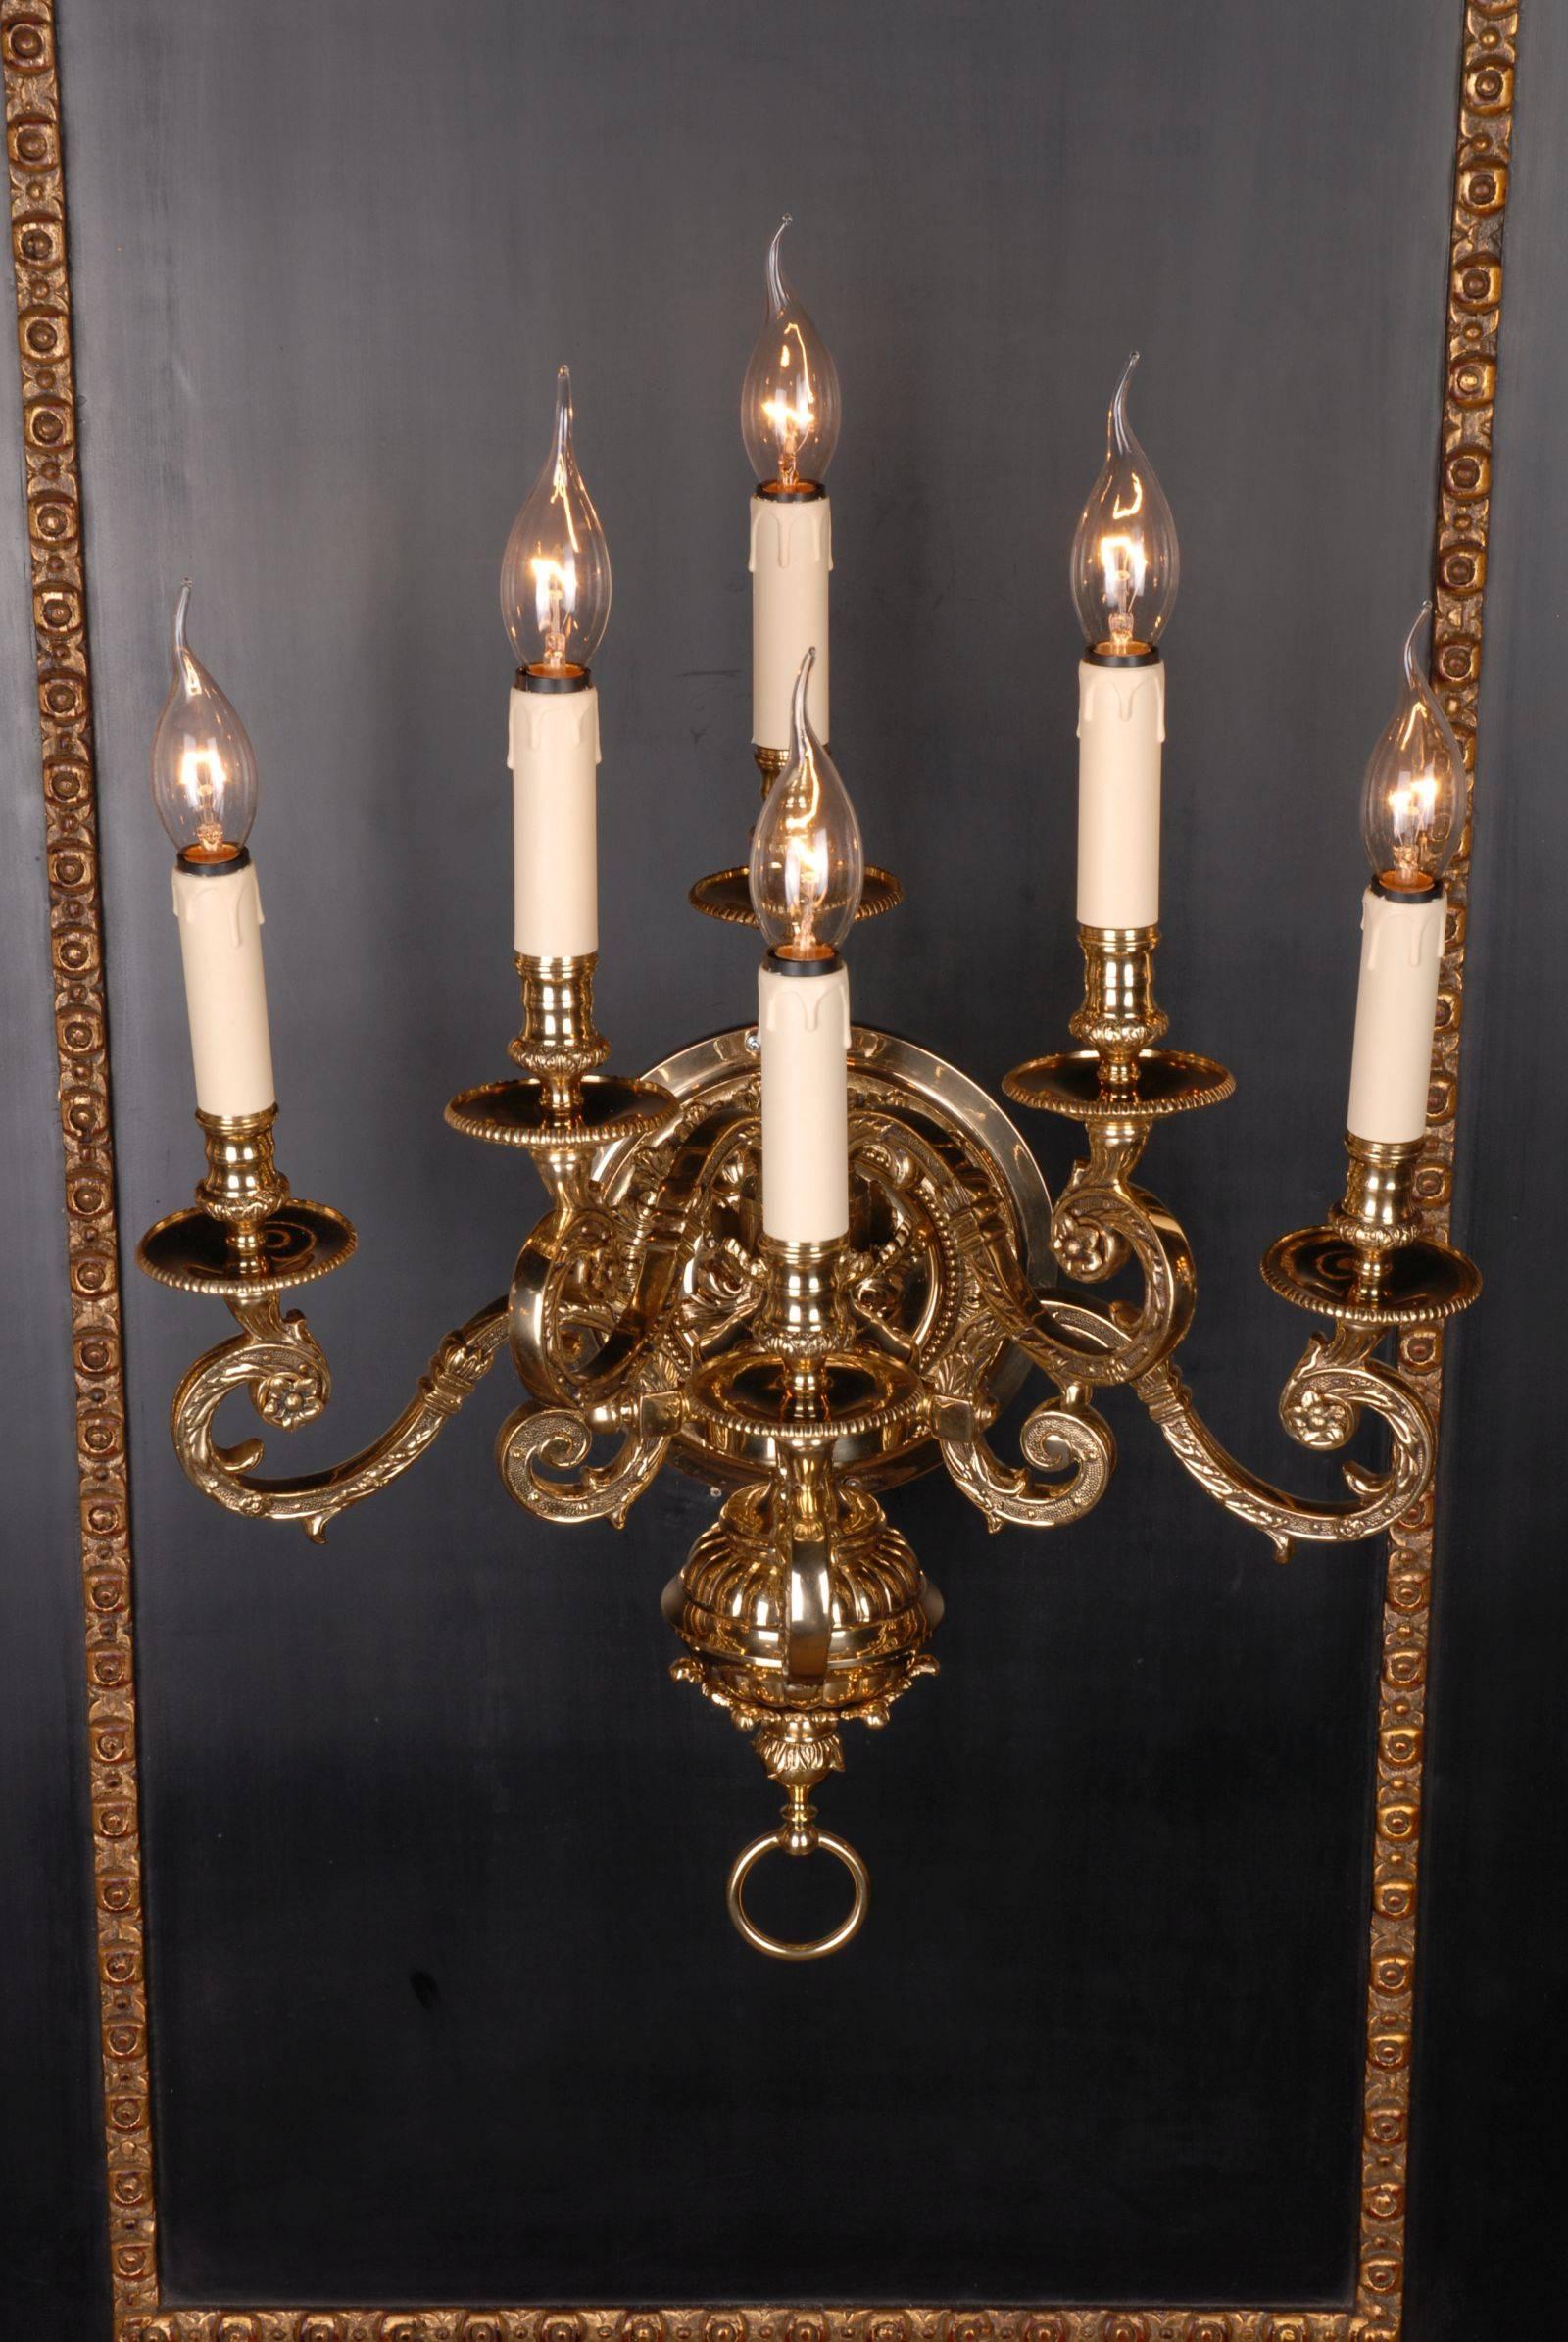 Baroque wall light in Louis XIV style.
Six flamed light corpus. Polished and engraved bronze. Round, reliefed,
wall-shield. There from, six light arms composed of spirals.

(F-Ra-70).